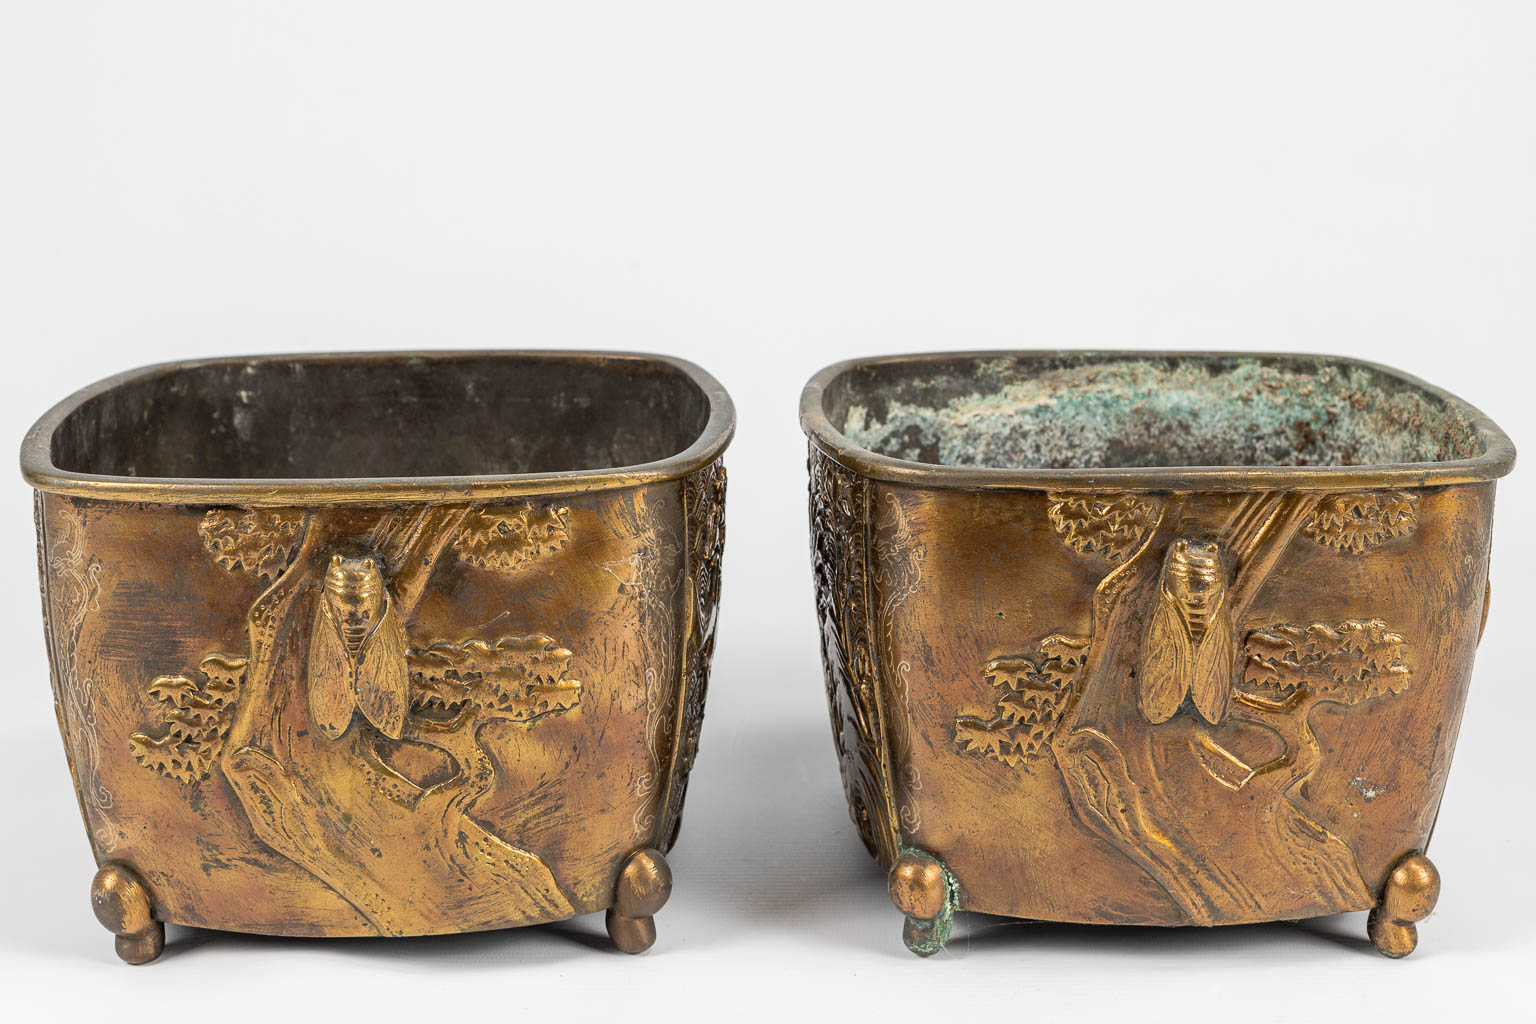 A pair of Oriental cache pots made of bronze and decorated with bees and birds